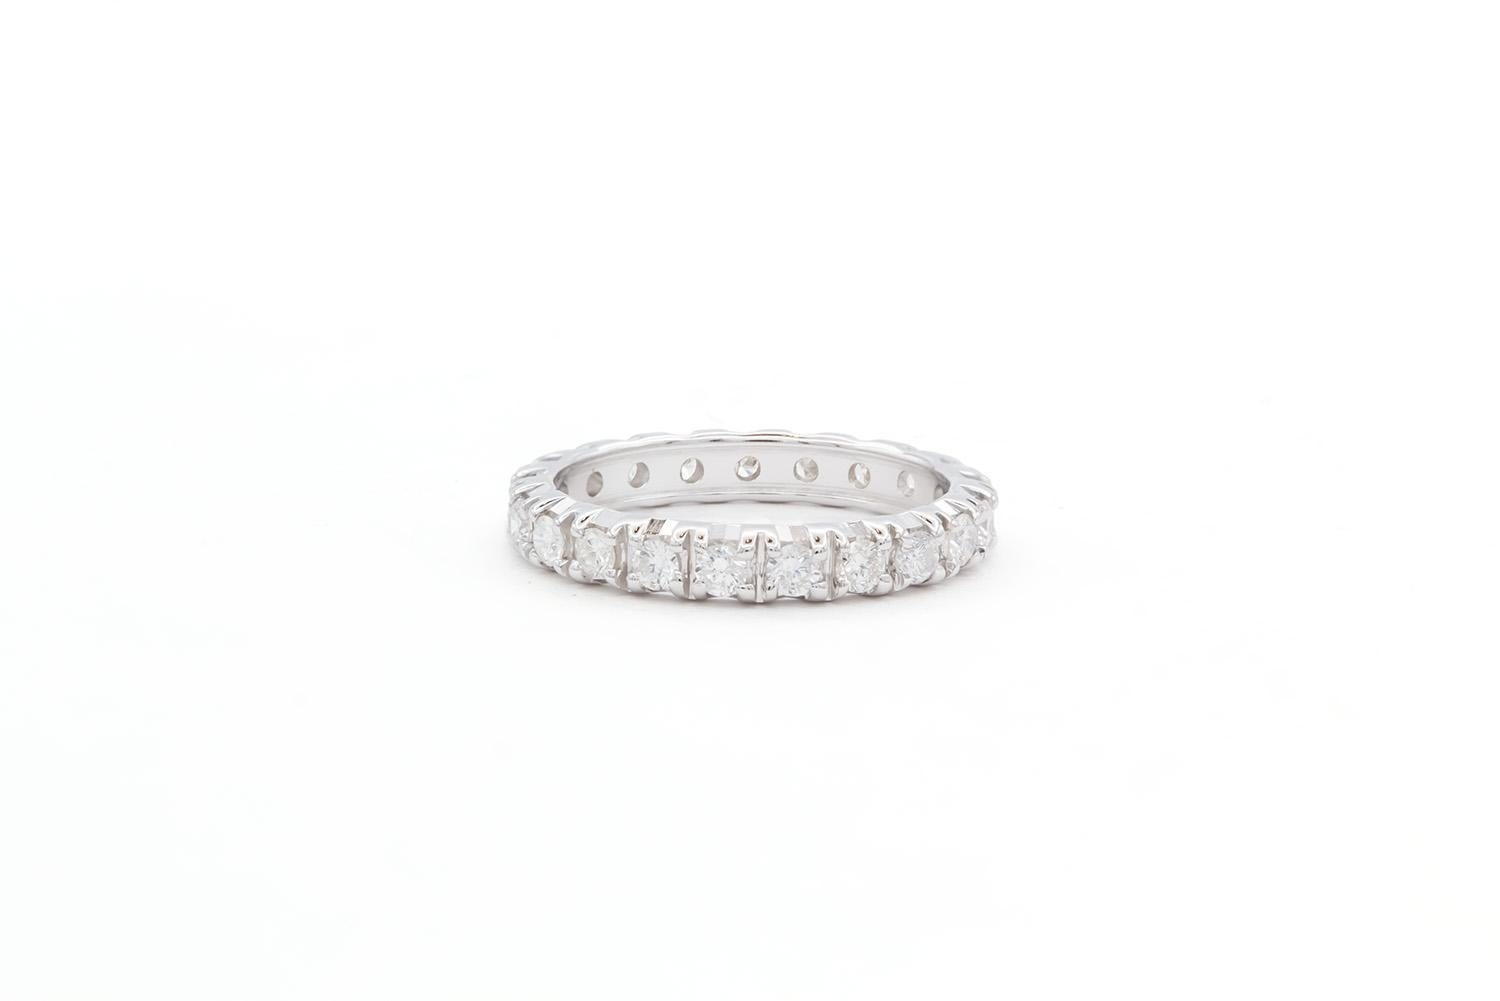 We are pleased to offer this 14k White Gold & Diamond Eternity Wedding Band. This beautiful wedding band features an eternity style band with an estimated 0.80ctw G-H/VS-SI round brilliant cut diamonds all set in 14k white gold. The ring is size